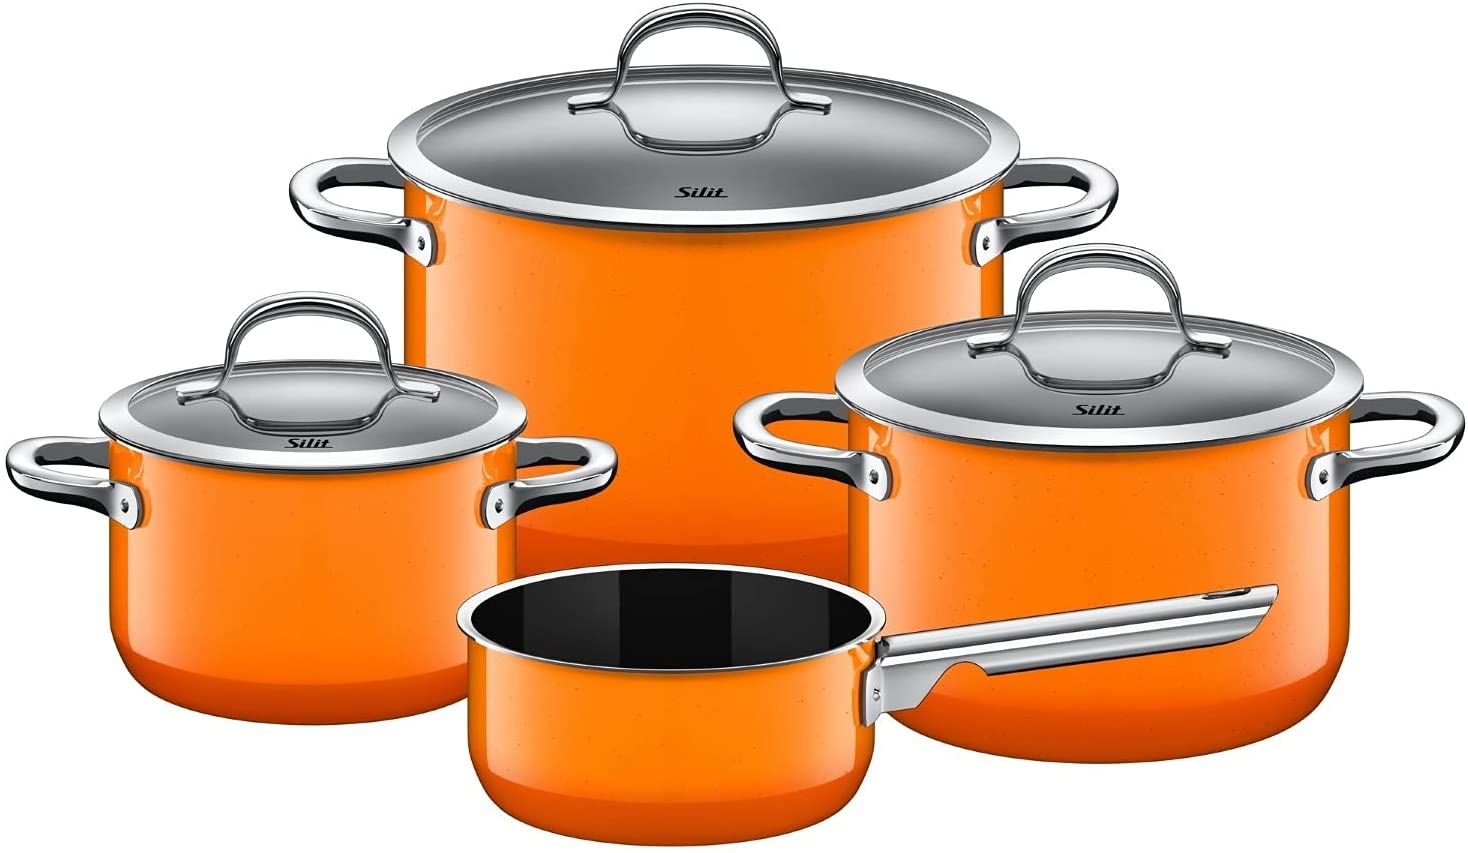 Silit Passion orange, 4-piece saucepan set with glass lid, Silargan functional ceramic pouring rim, suitable for induction cookers, orange.